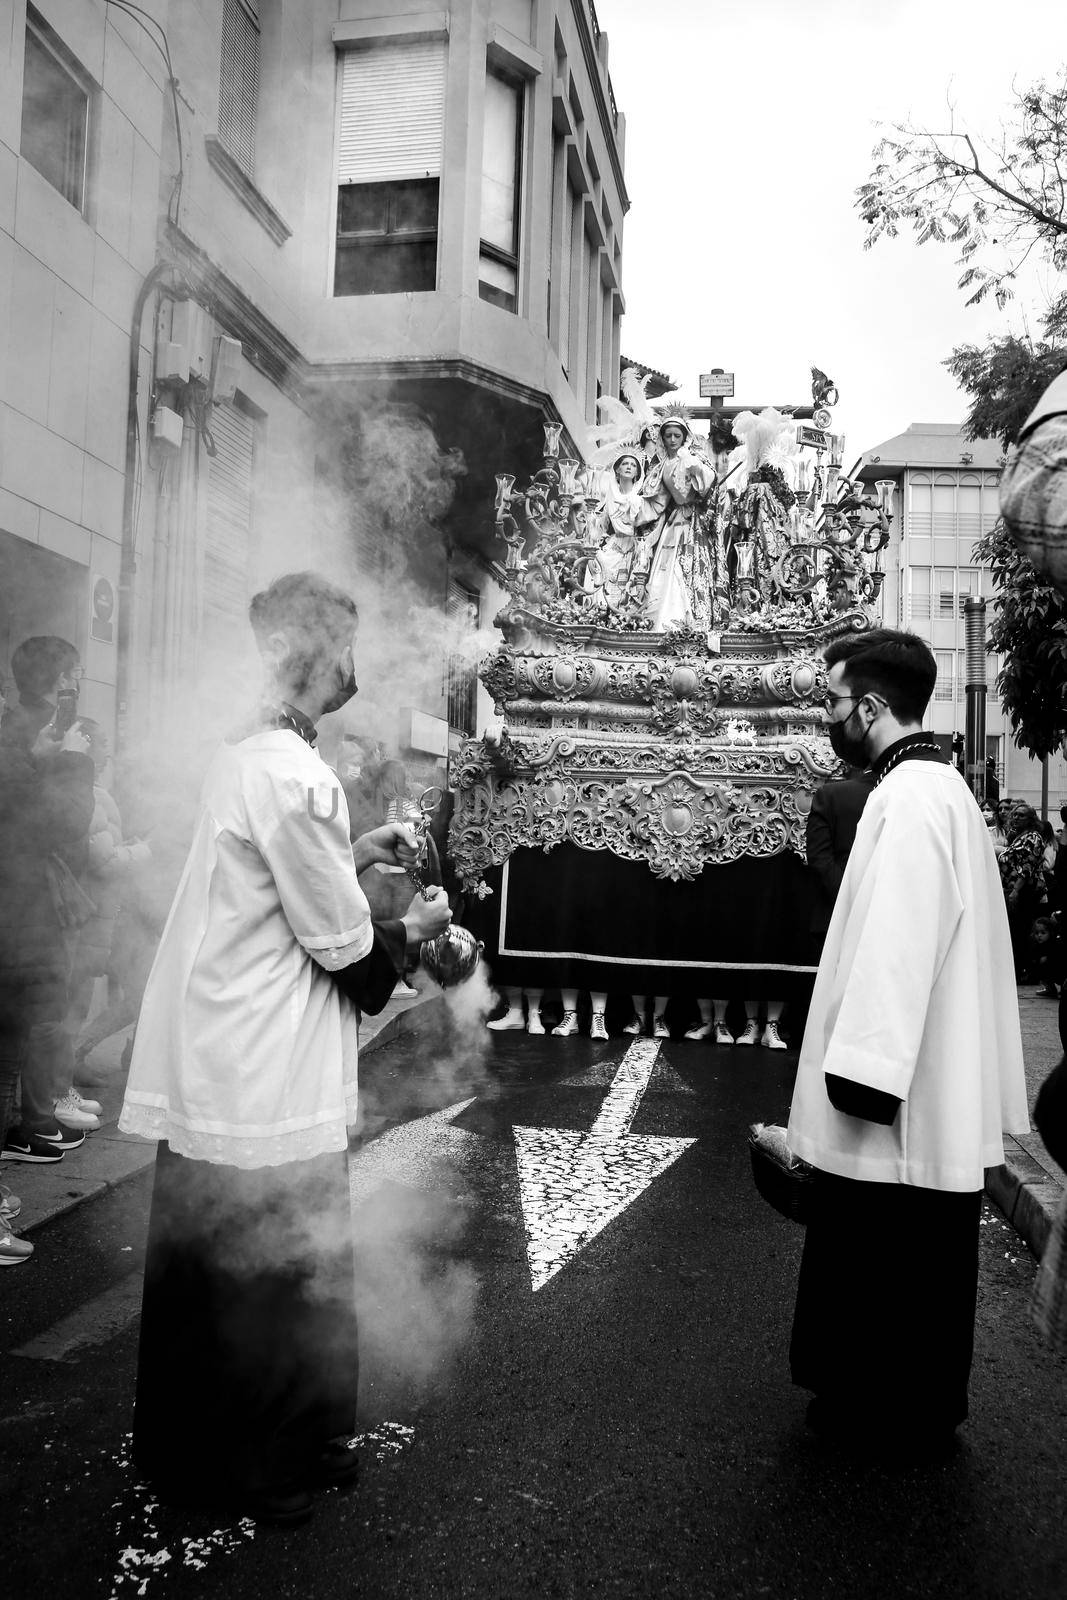 Easter Parade with altar boys in procession of Holy Week in Spain by soniabonet